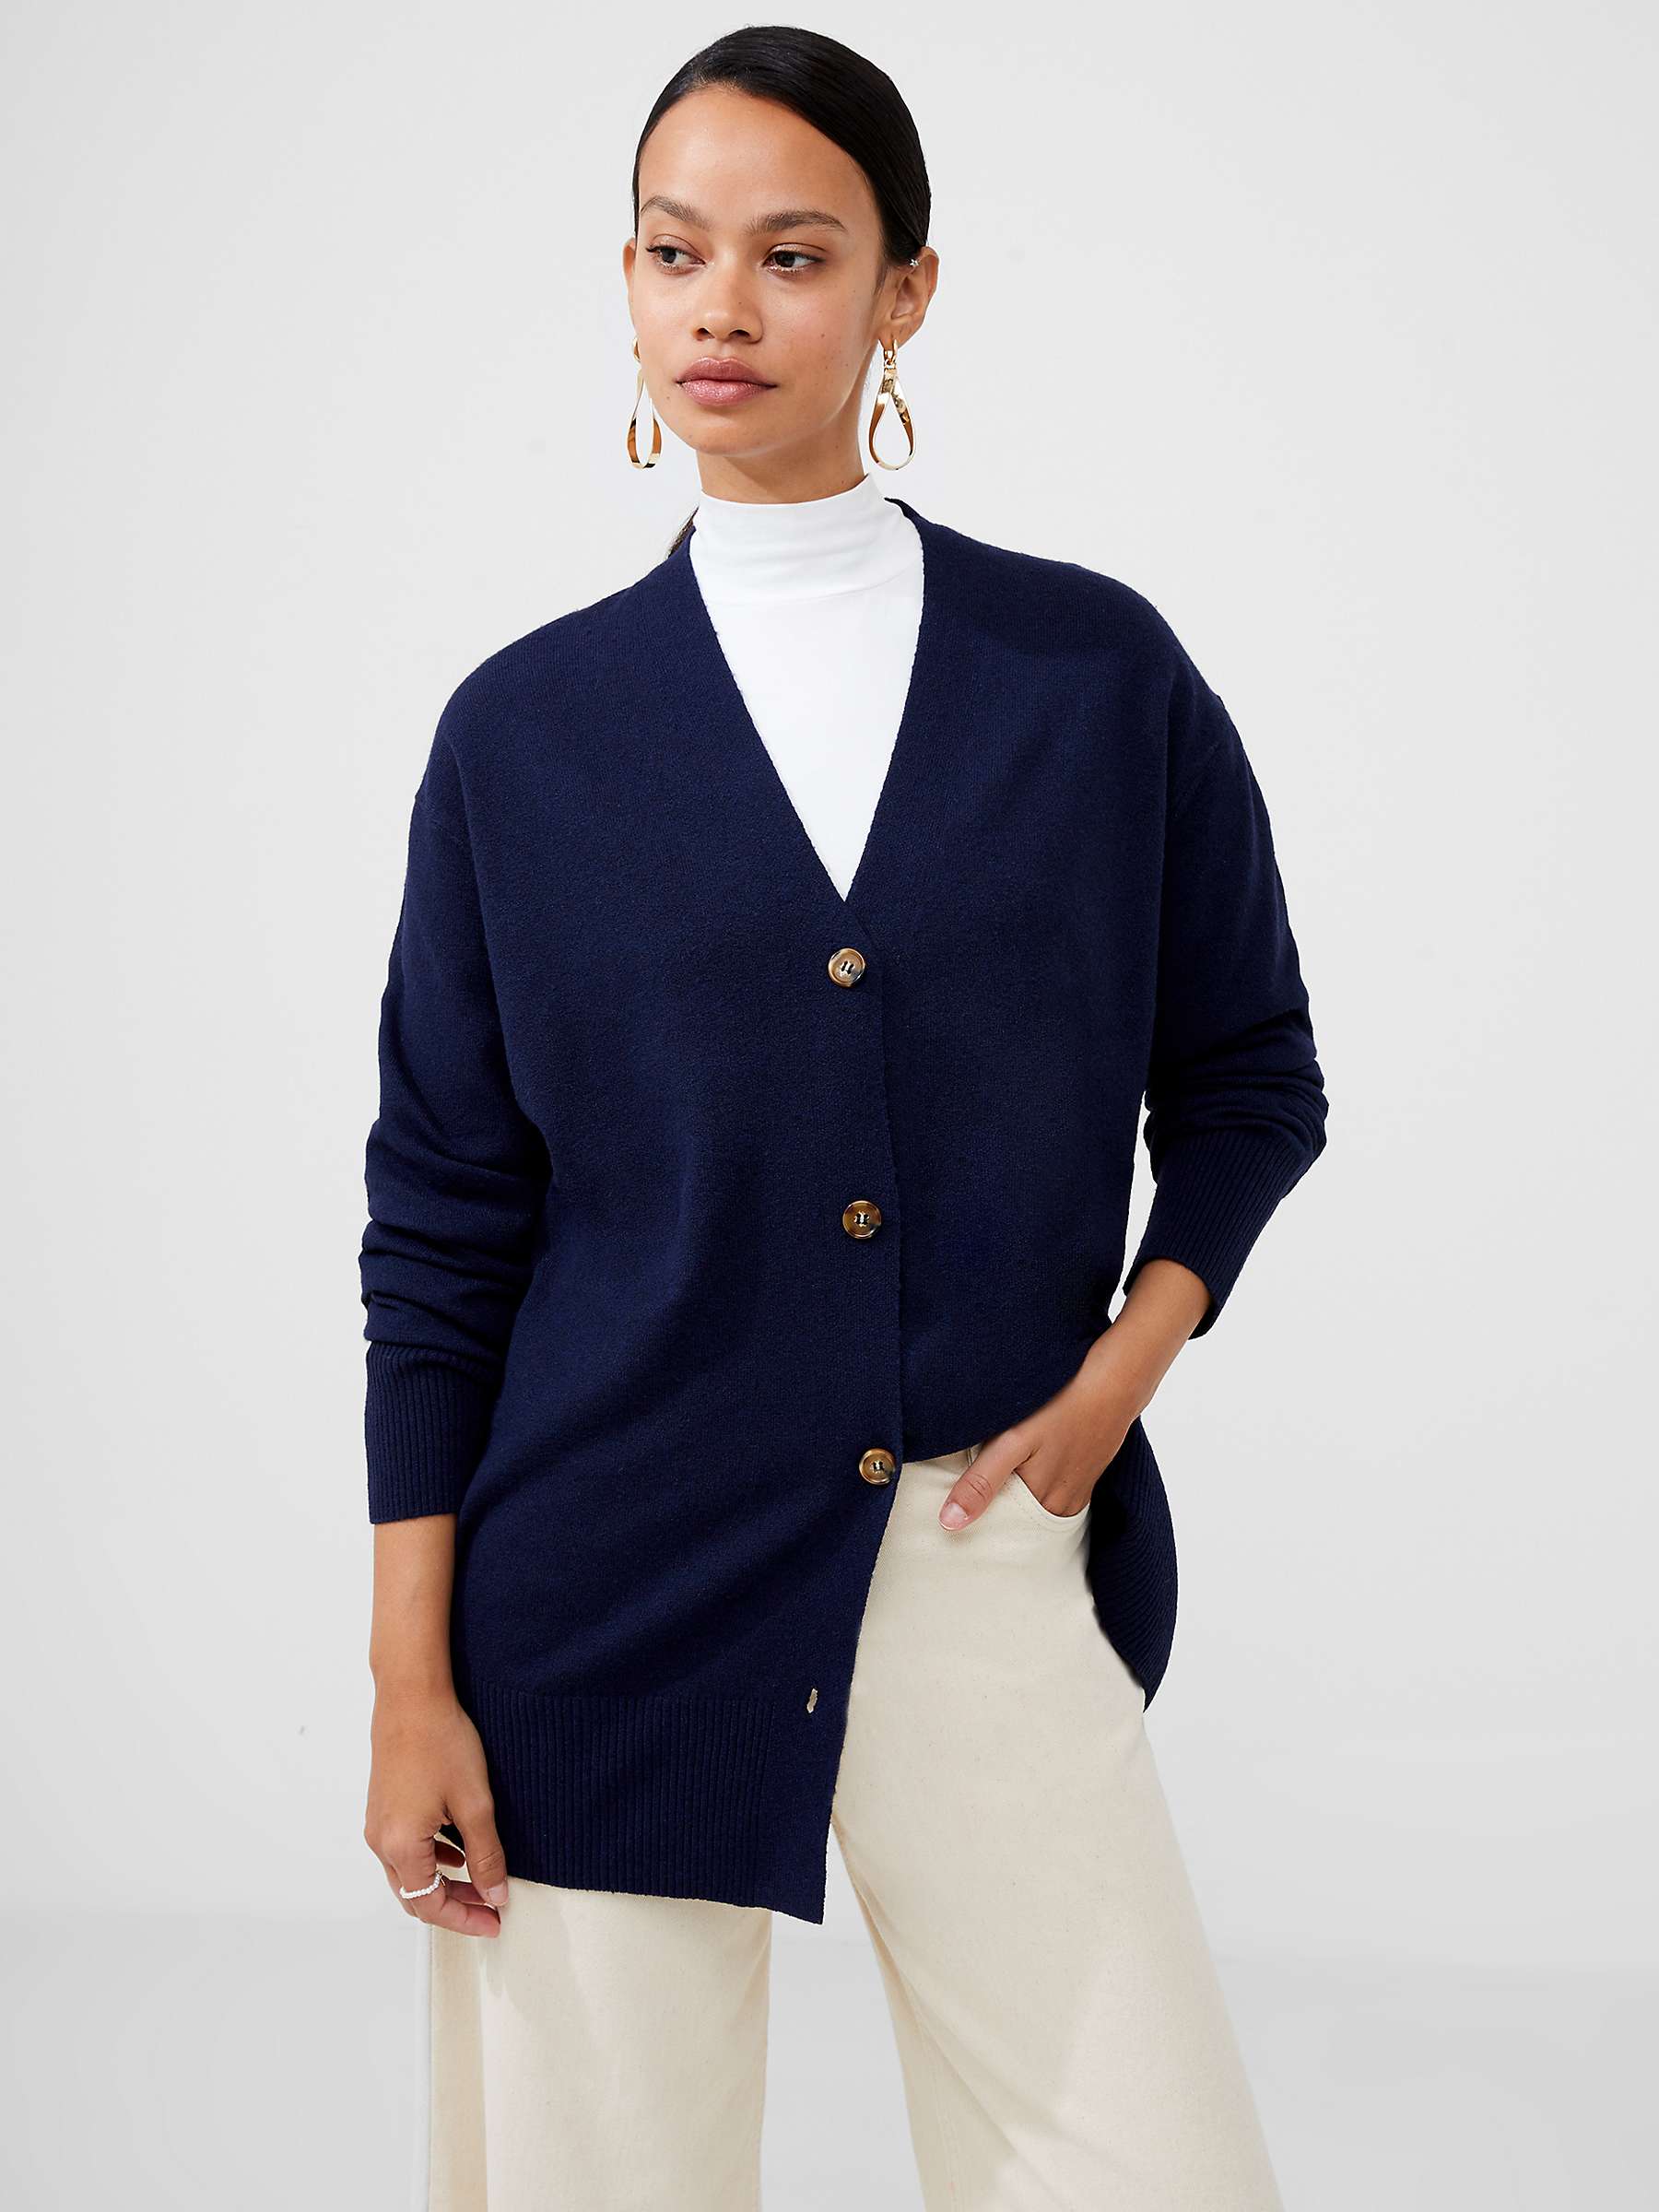 Buy French Connection Vhari Knit Cardigan, Marine Online at johnlewis.com